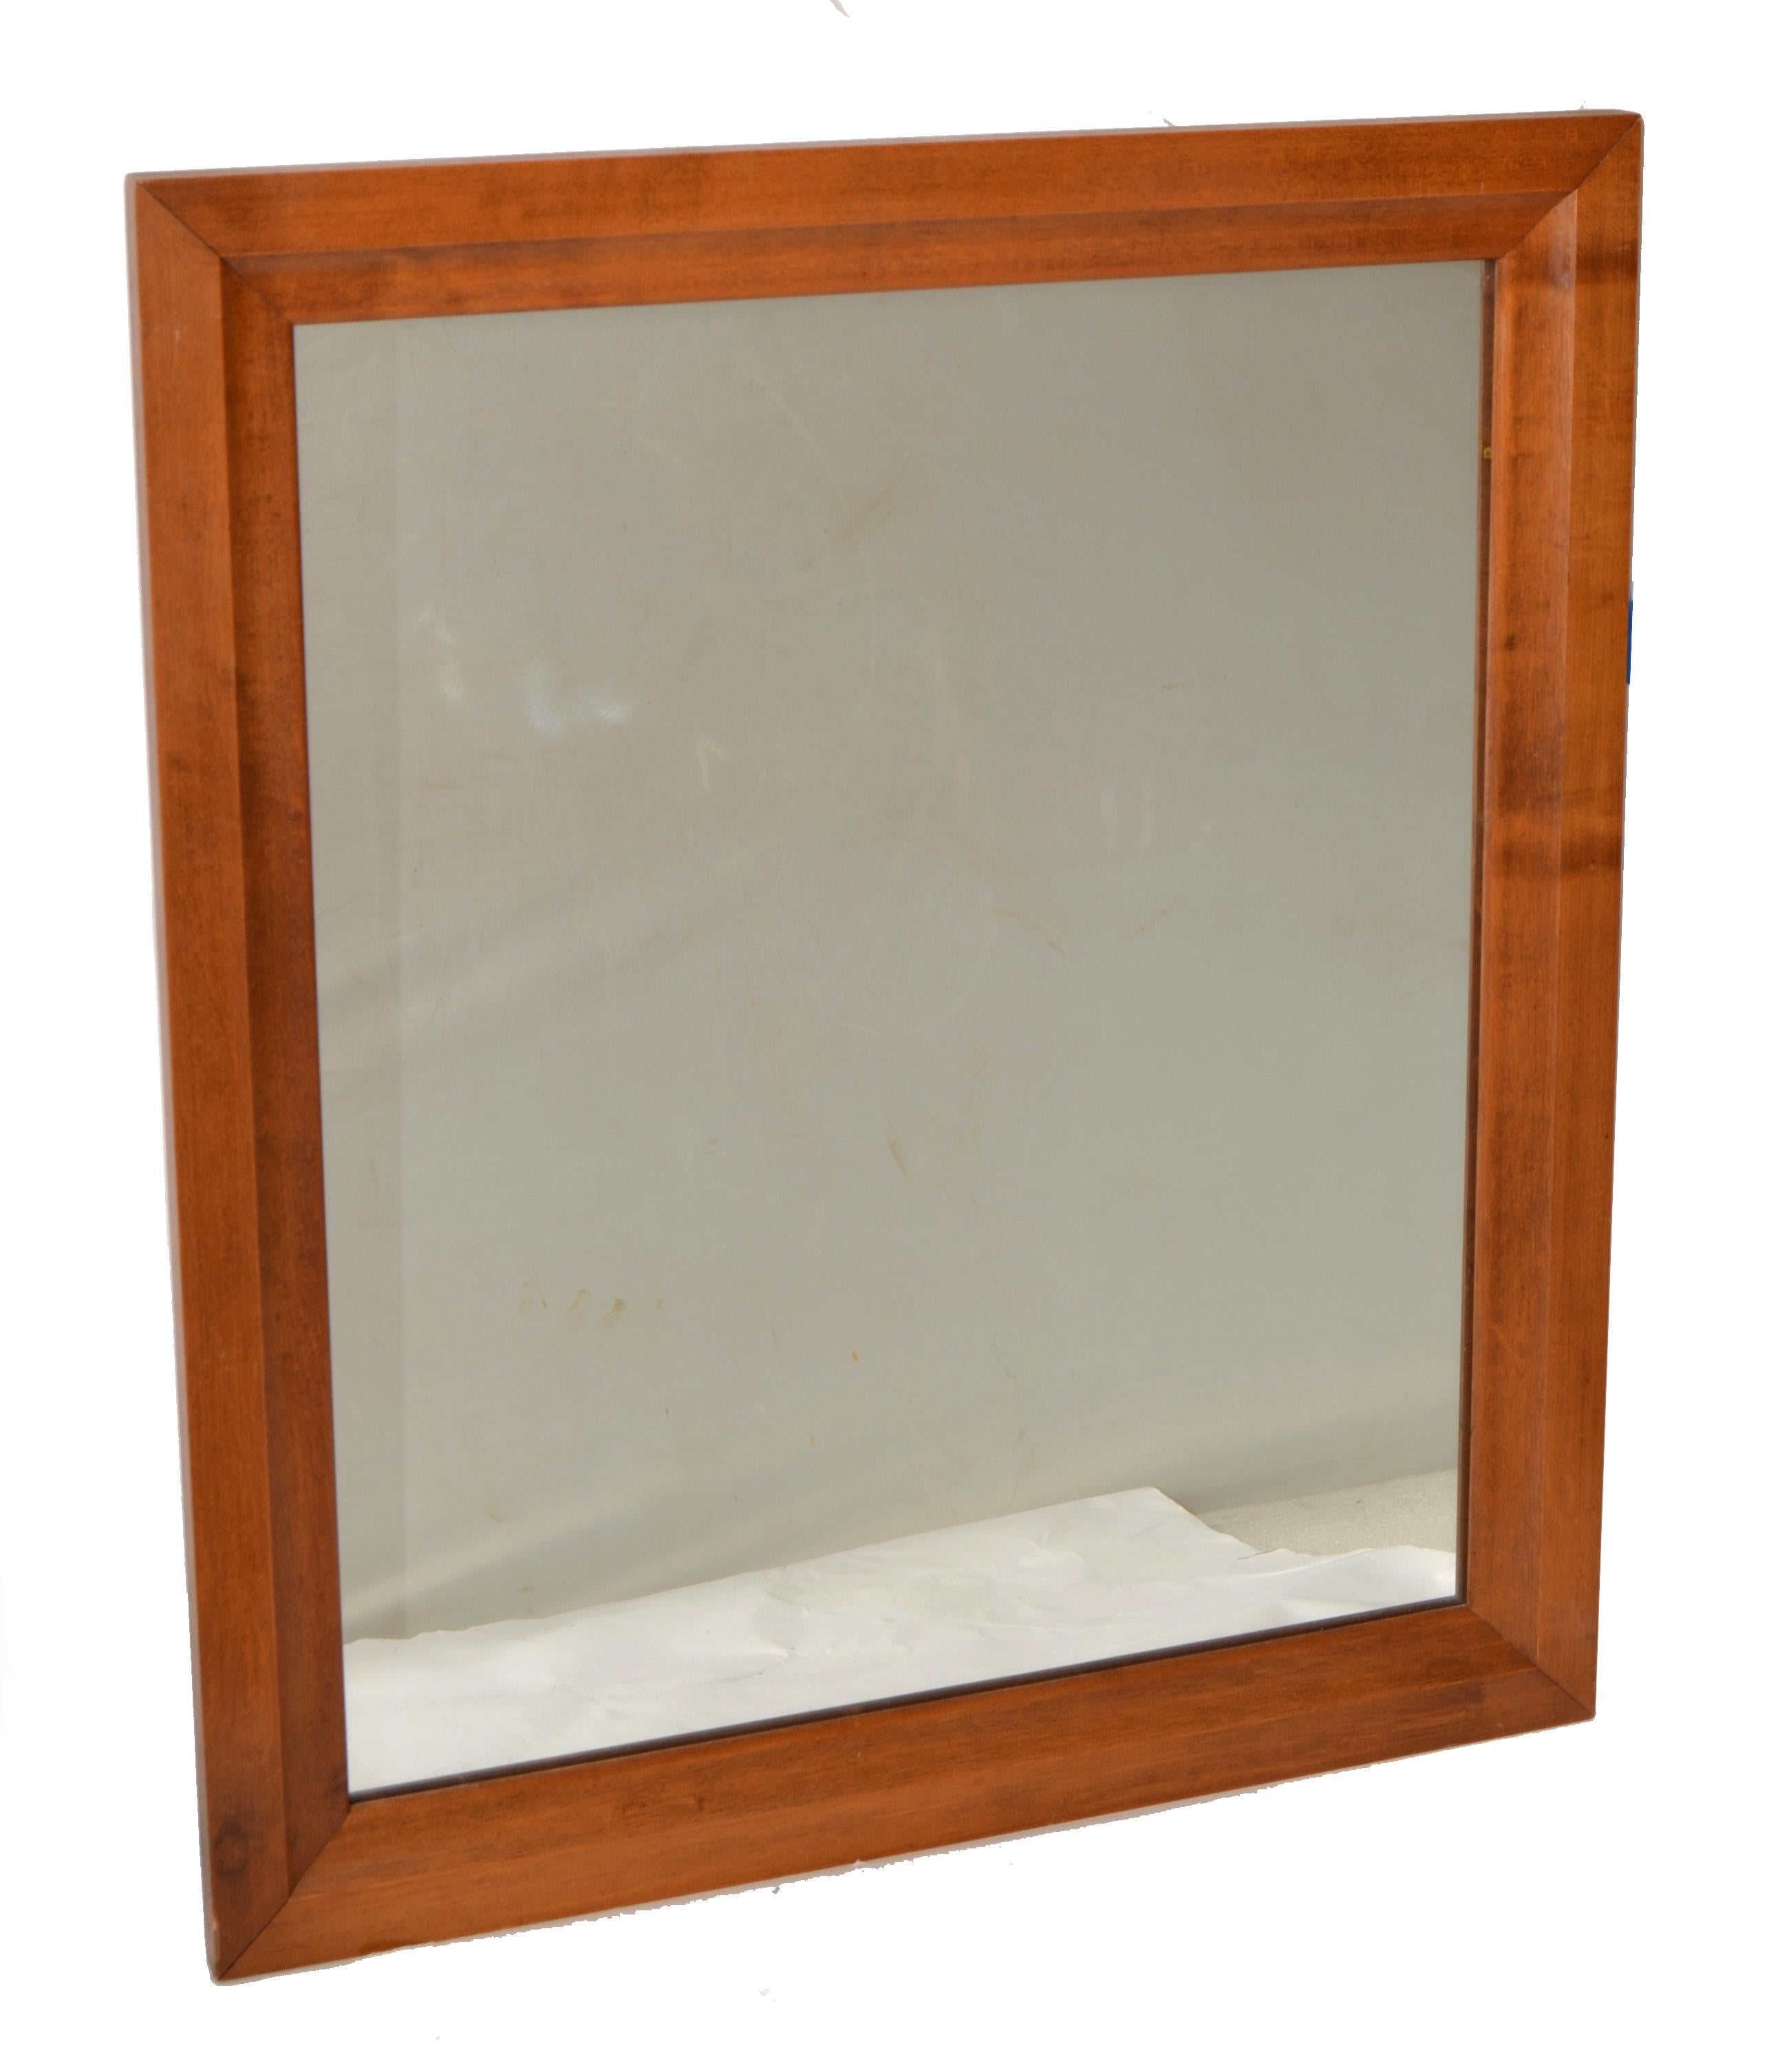 Traditional Early American Maple Wood Wall Mirror made by Vintage Moosehead Furniture.
Moosehead is known for heavy Maple and New England Birch furniture since 1960.
This rectangle Wall Mirror is great quality and quite heavy.
Secure hanging wire on